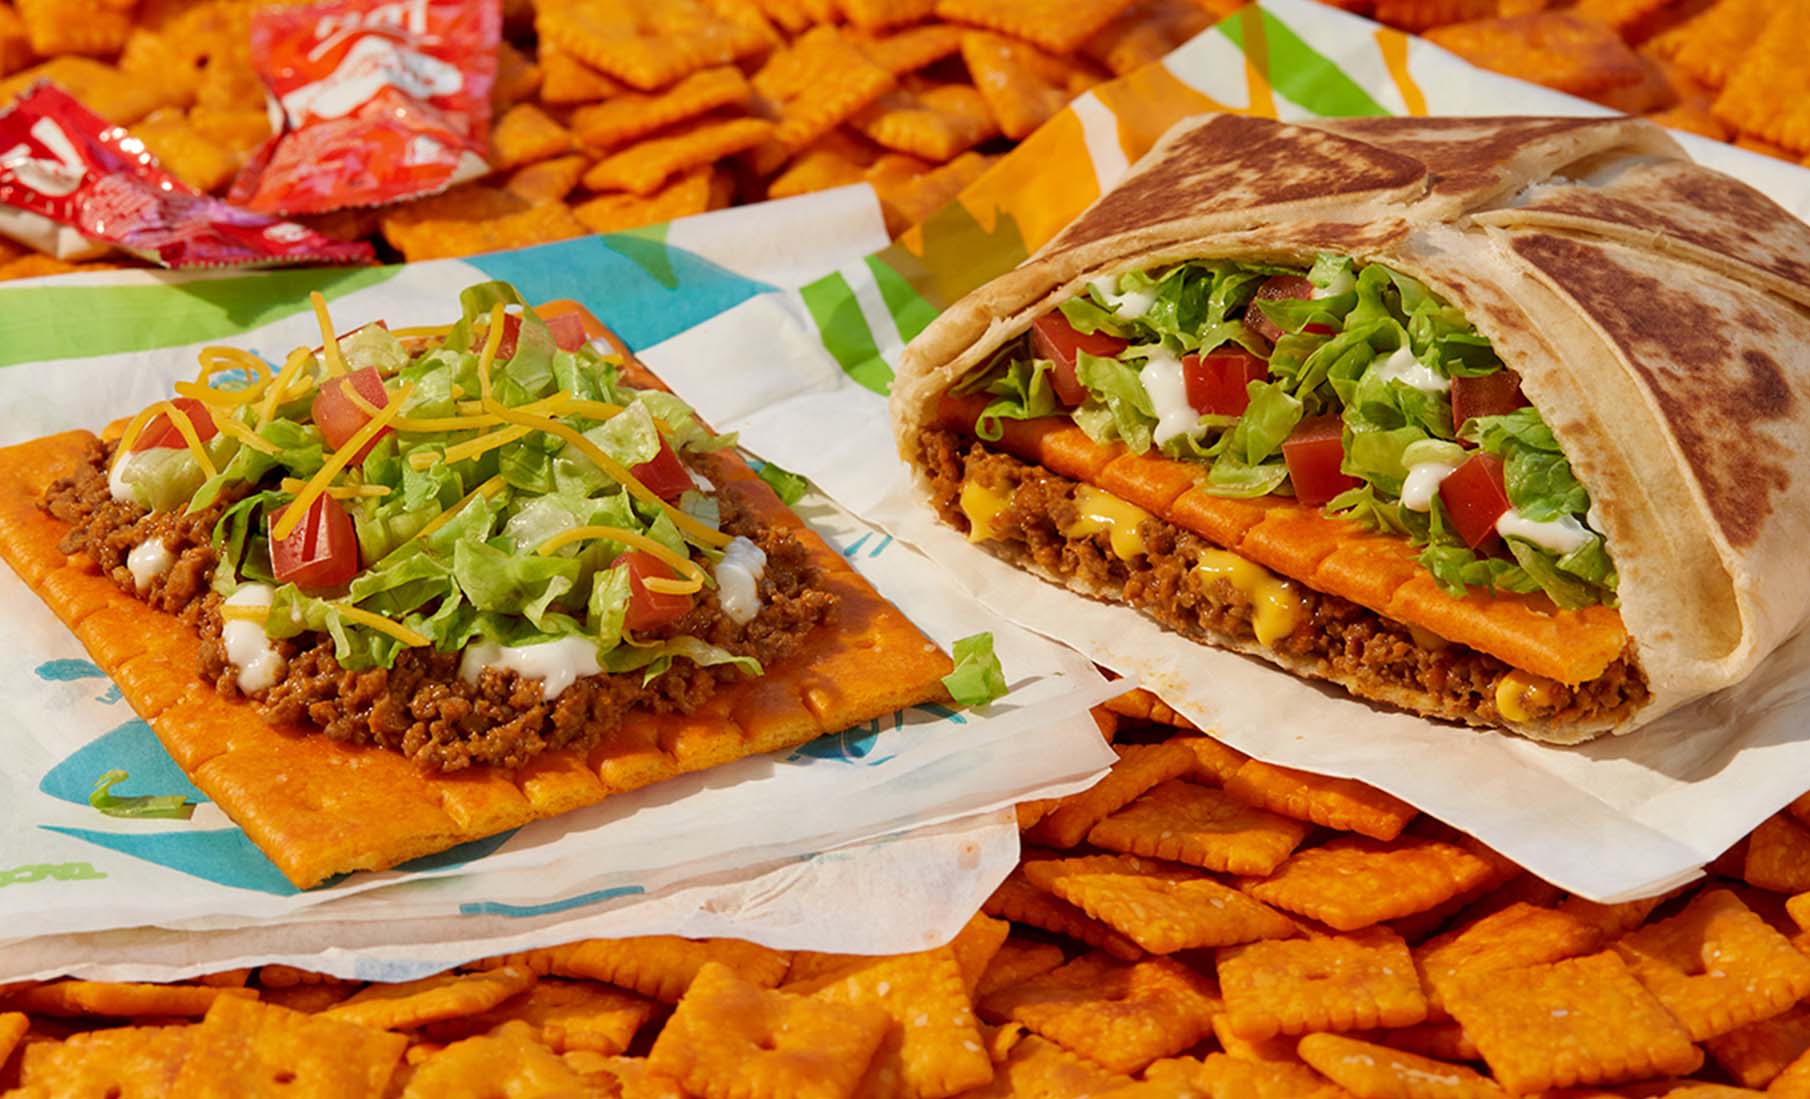 Taco Bell’s Big Cheez-It Tostada and Big Cheez-It Crunchwrap Supreme. In 2019, buying a Crunchwrap Supreme in the New York City metropolitan area would have cost $3.49. Now, it costs $5.29.